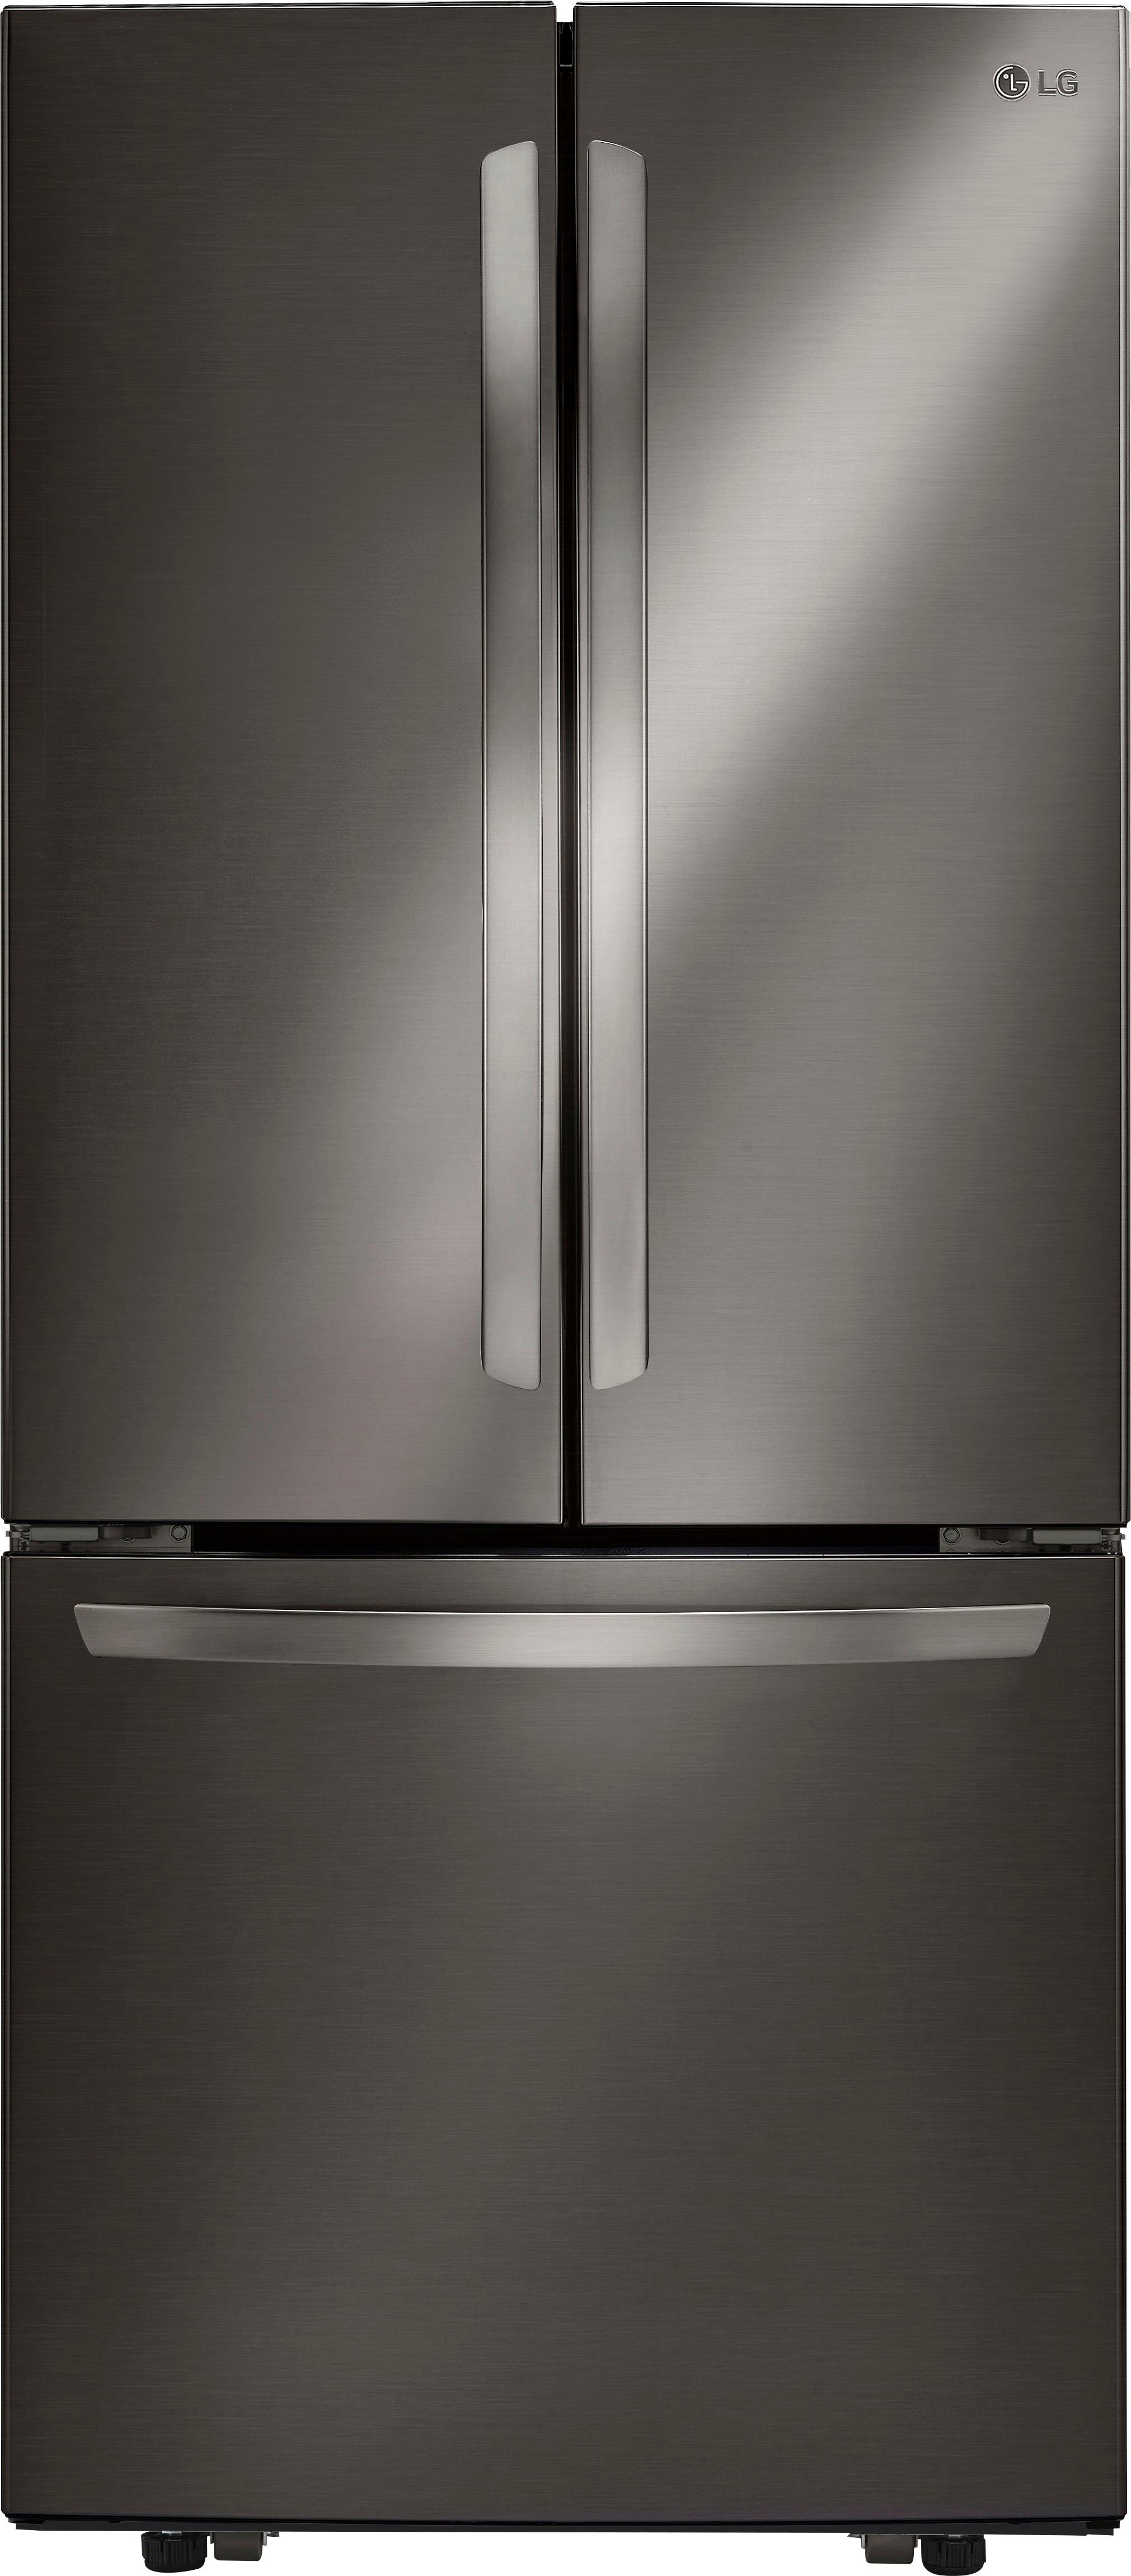 Lg Lfx25980st French Door Refrigerator With Ice And Water Dispenser Lg Usa